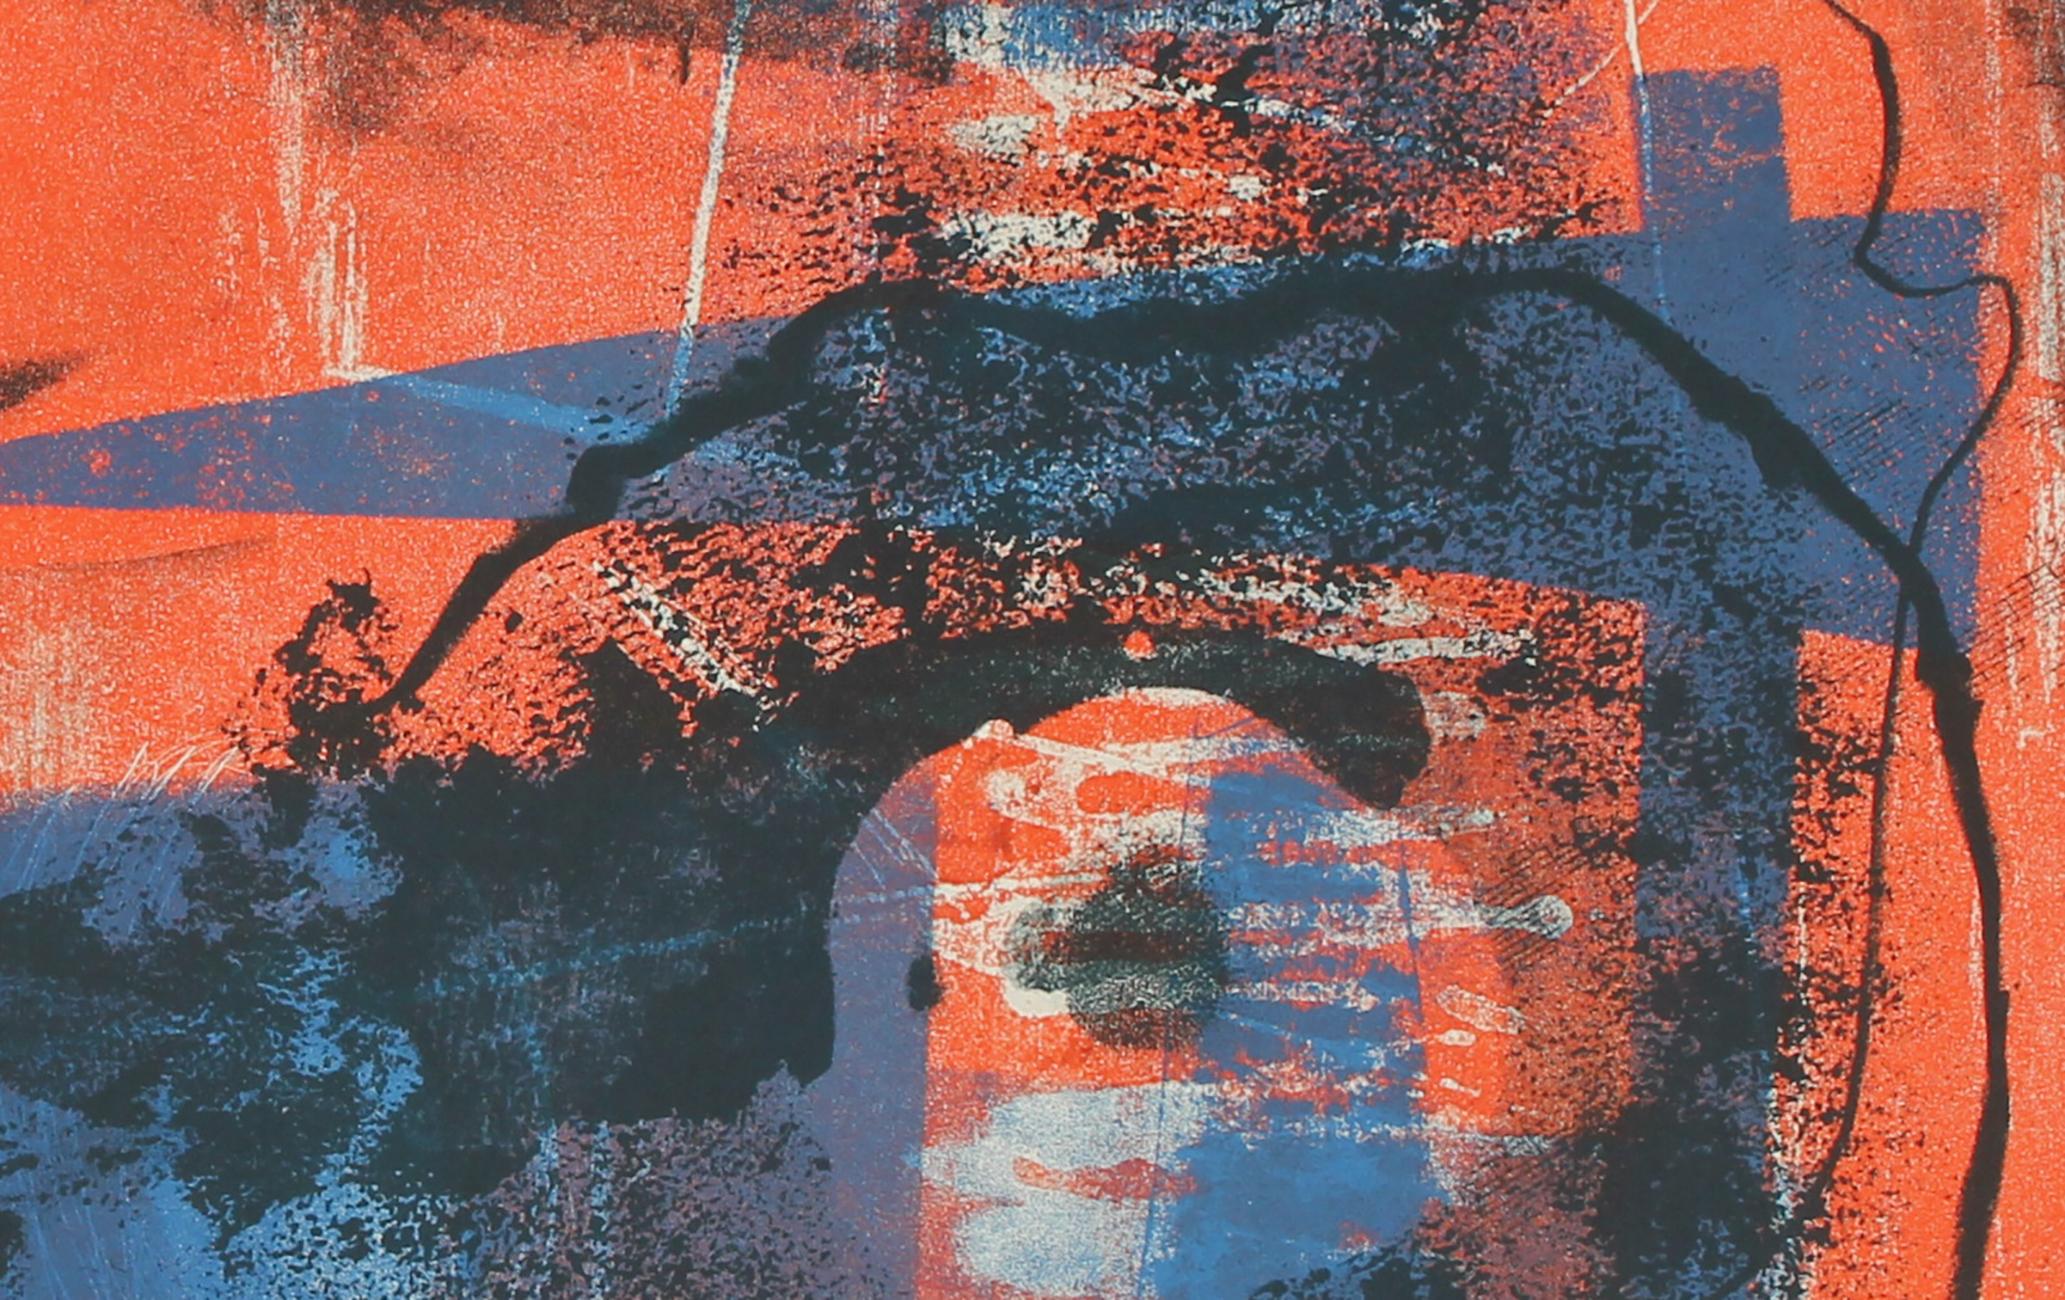 This late 1940s- early 1950s stone lithograph on paper abstract in orange and blue is by California artist Jerry Opper (1924-2014). Opper studied at Chouinard Art Institute, at the Colorado Springs Fine Arts Center, and at the California School of